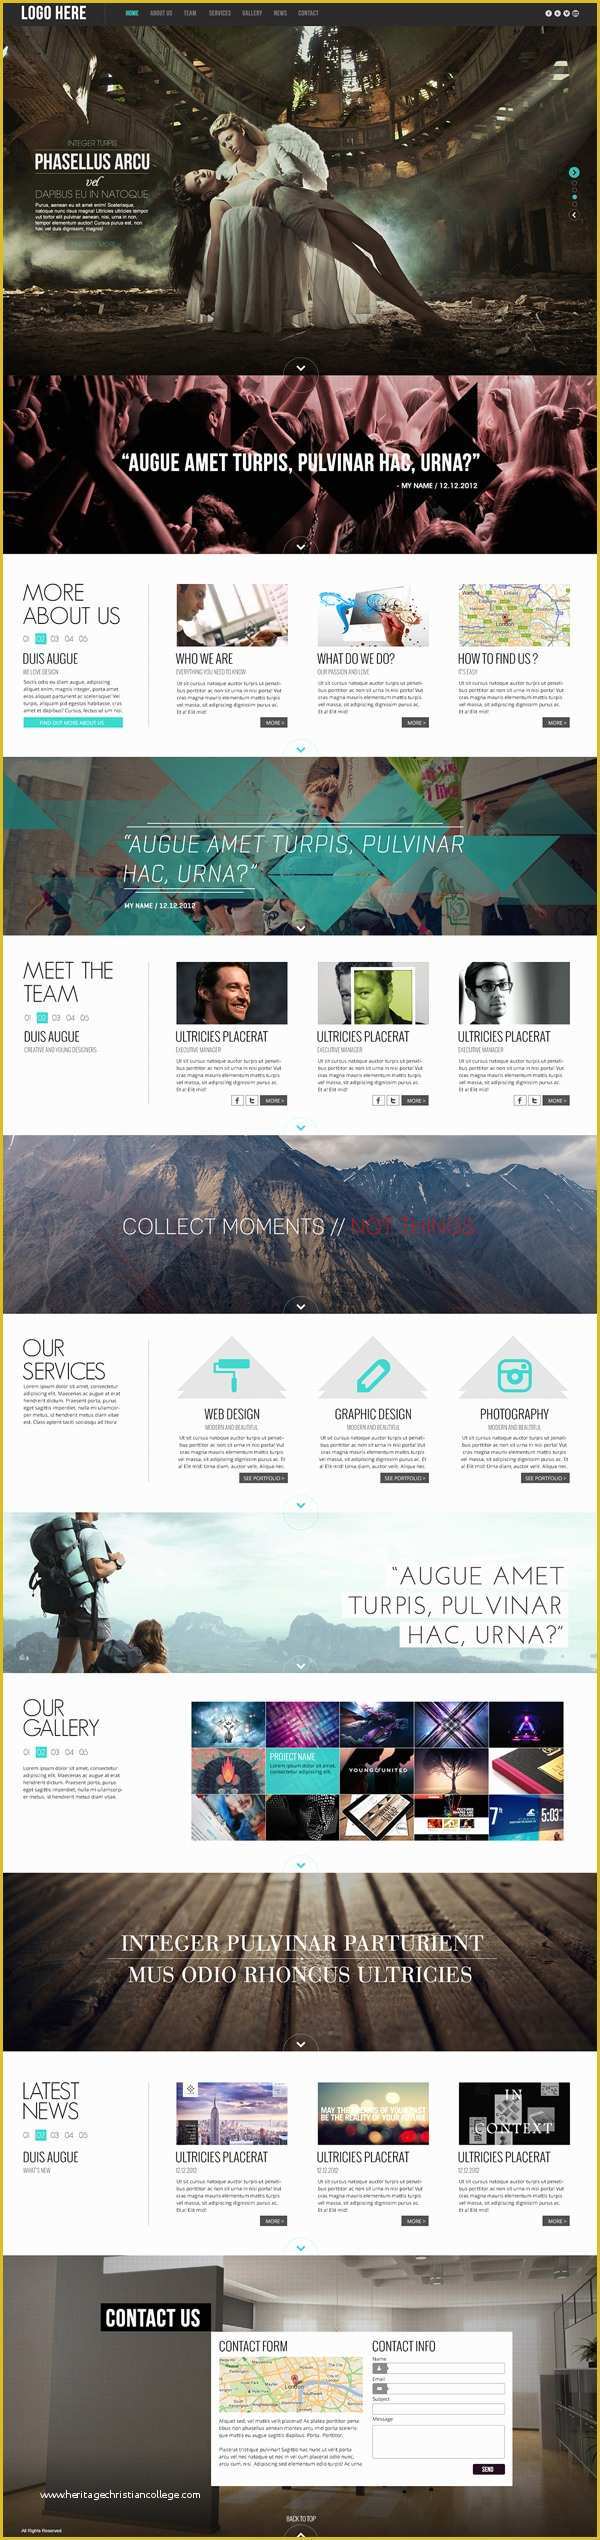 Gaming Website Template HTML5 Free Of Pulsar E Page HTML5 Parallax Website Template by